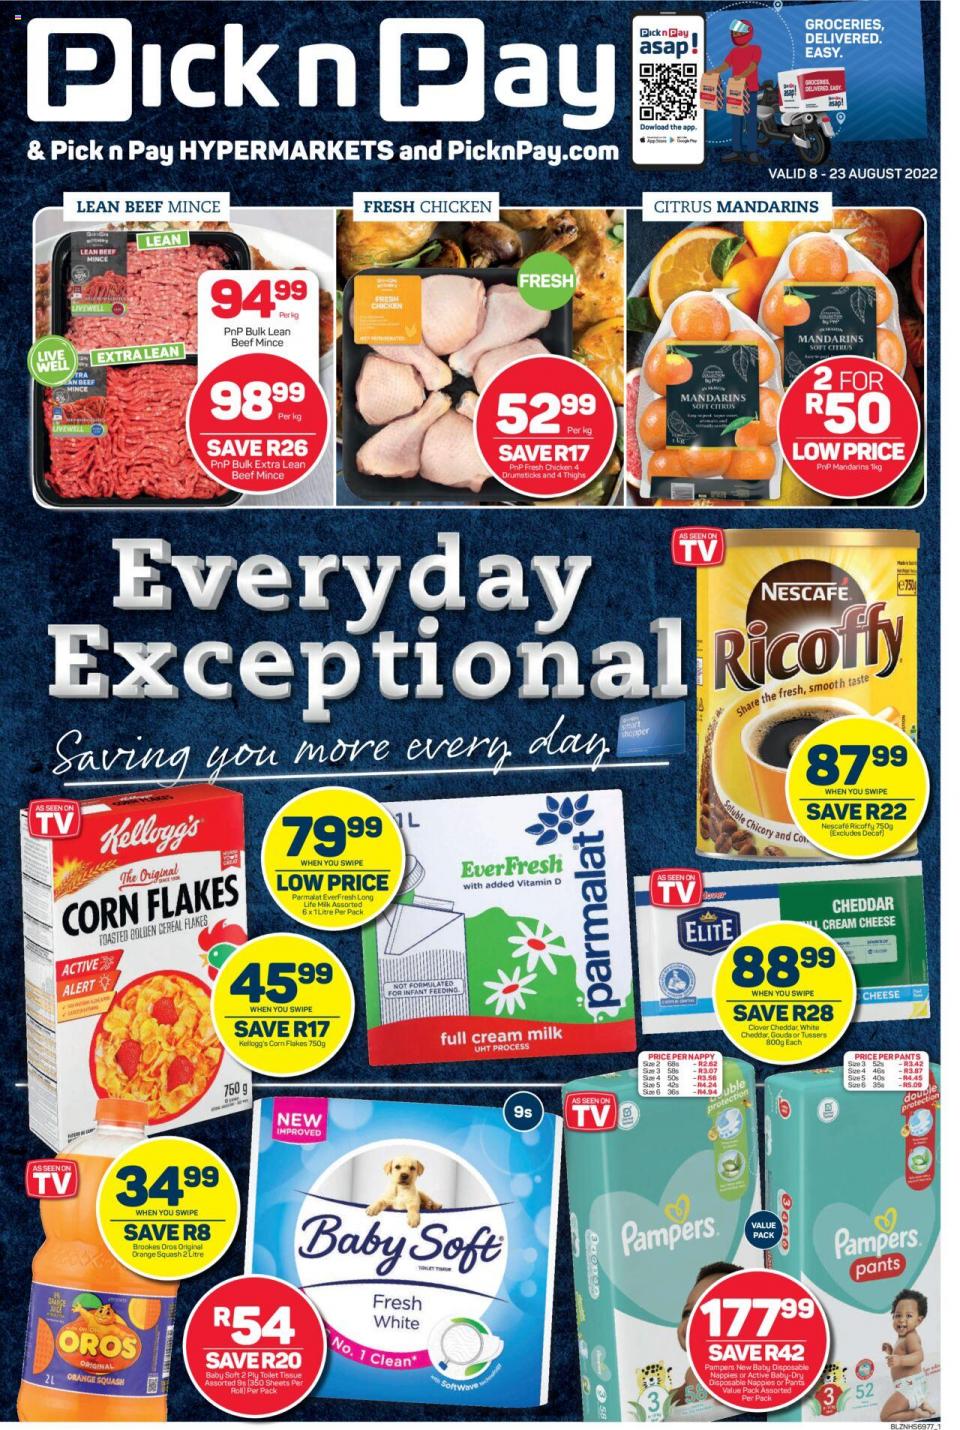 Pick n Pay Specials 8 – 23 August 2022